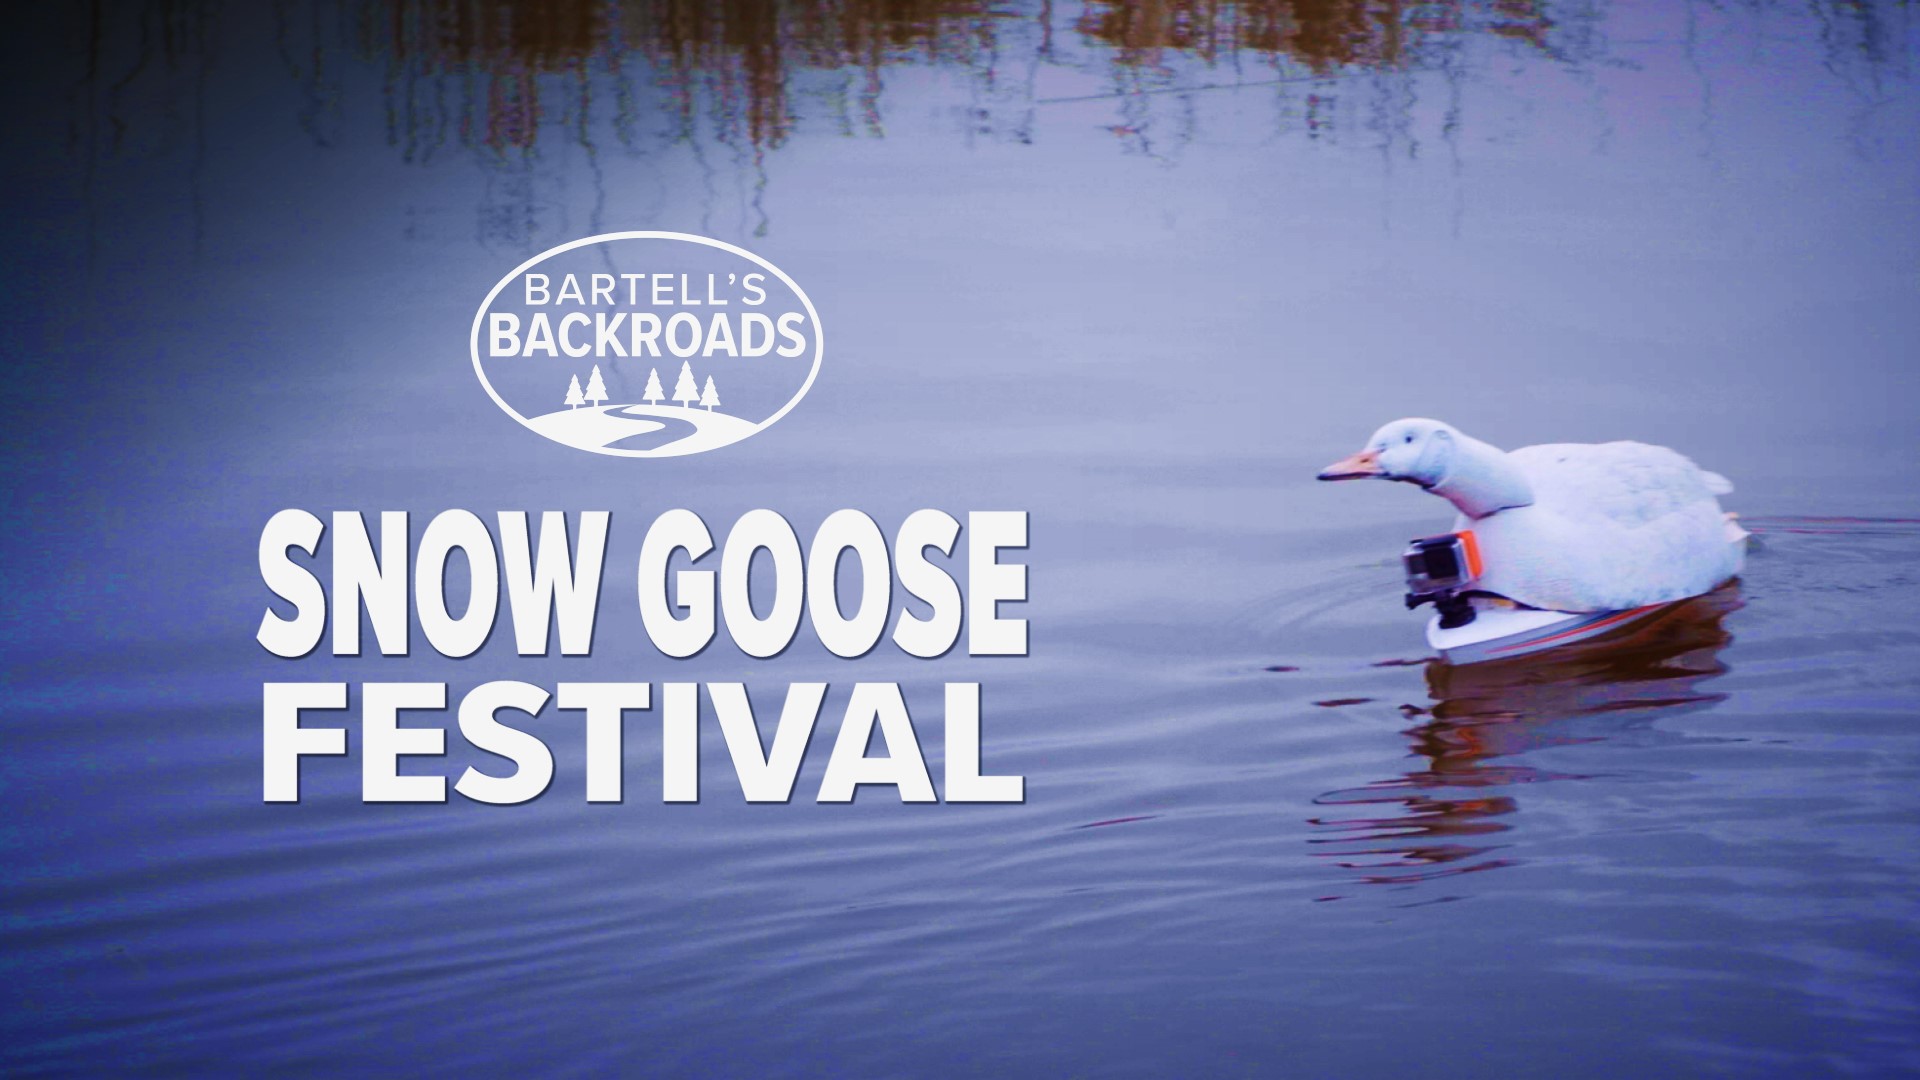 Bird watchers are flocking to the Snow Goose Festival of the Pacific Flyway to see some of the estimated five million geese that will make the Sacramento Valley their winter home. Armed with a homemade "Goose Cam," John Bartell tries his hand at nature photography with fairly tragic results.